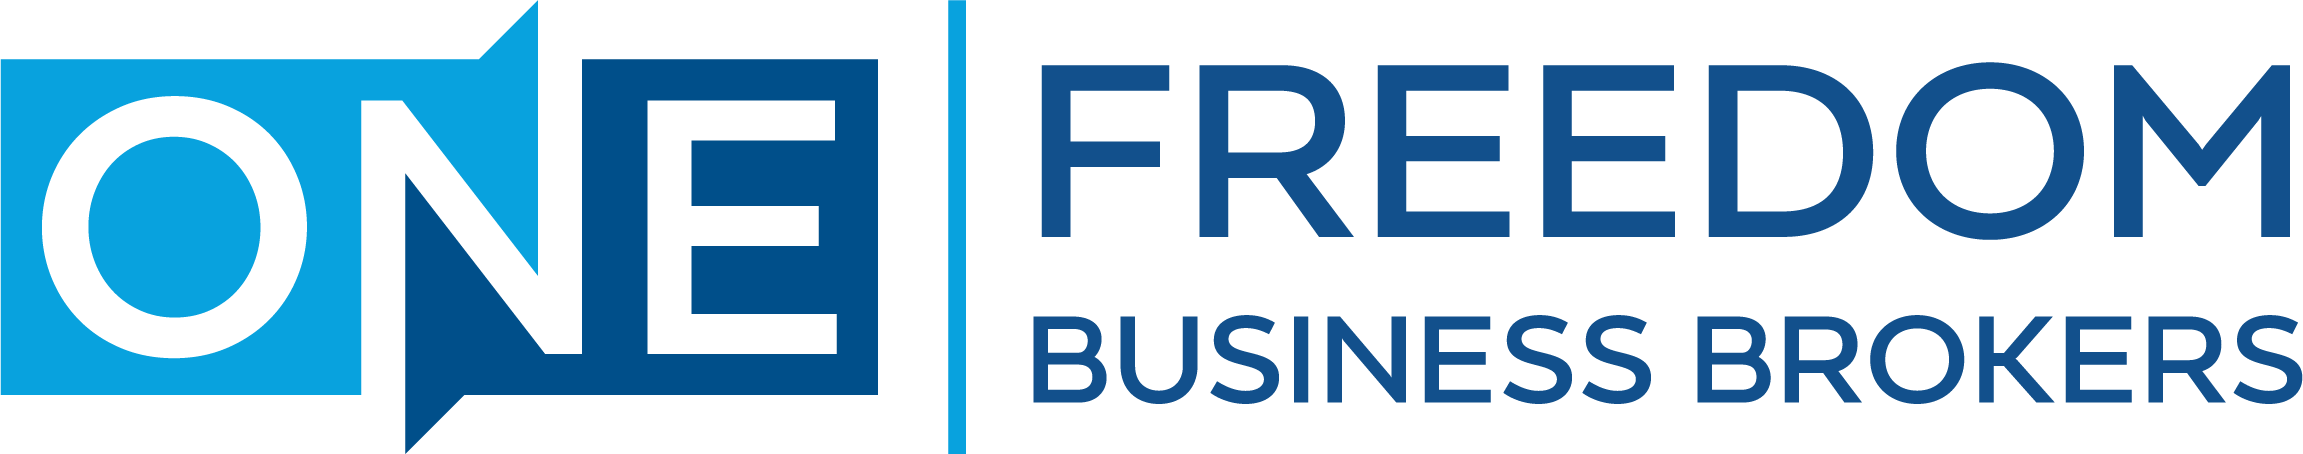 One Freedom Business Brokers